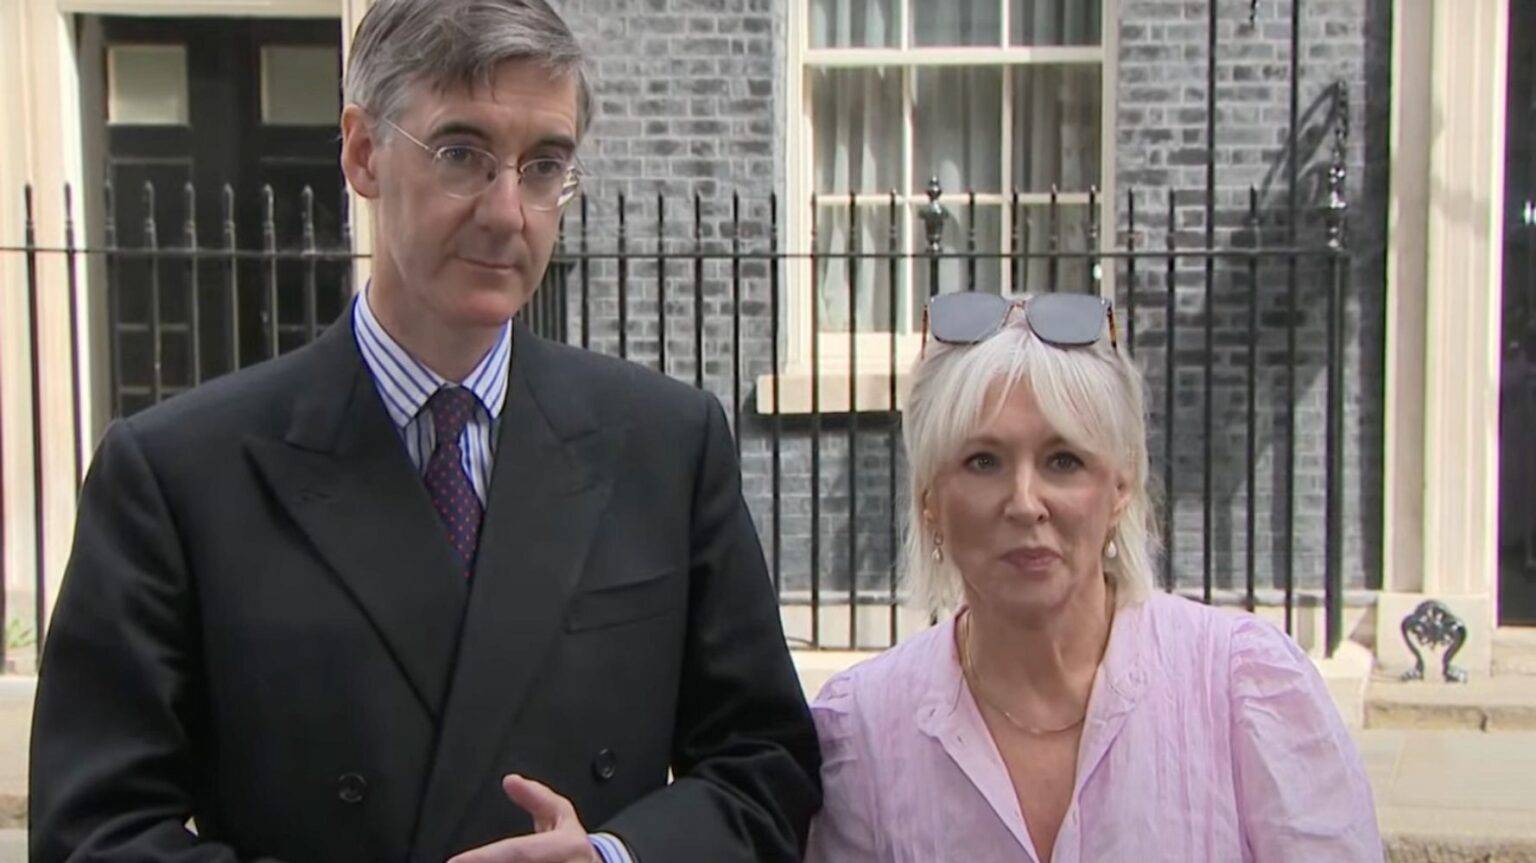 Nadine Dorries and Jacob Rees-Mogg criticised over Partygate probe